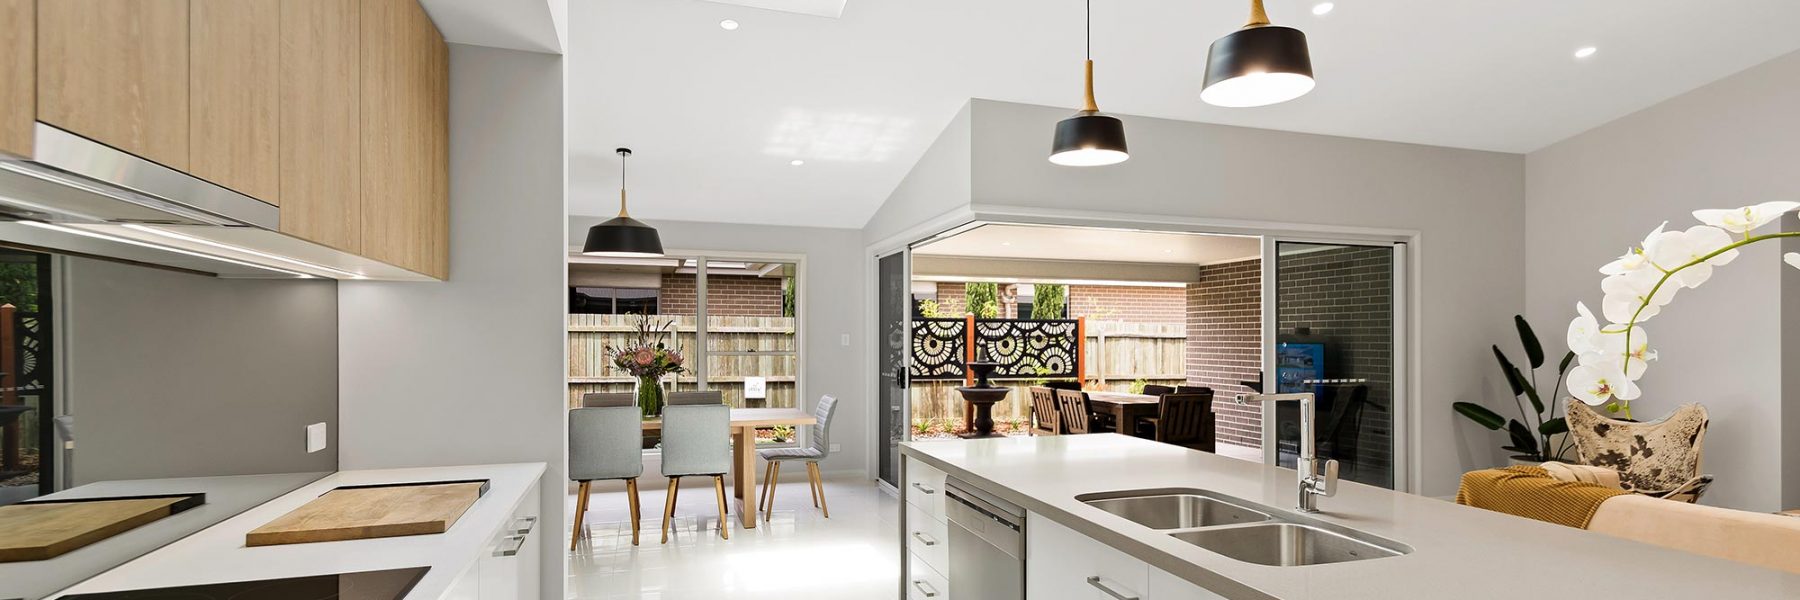 Wicks Joinery Kitchen in Toowoomba